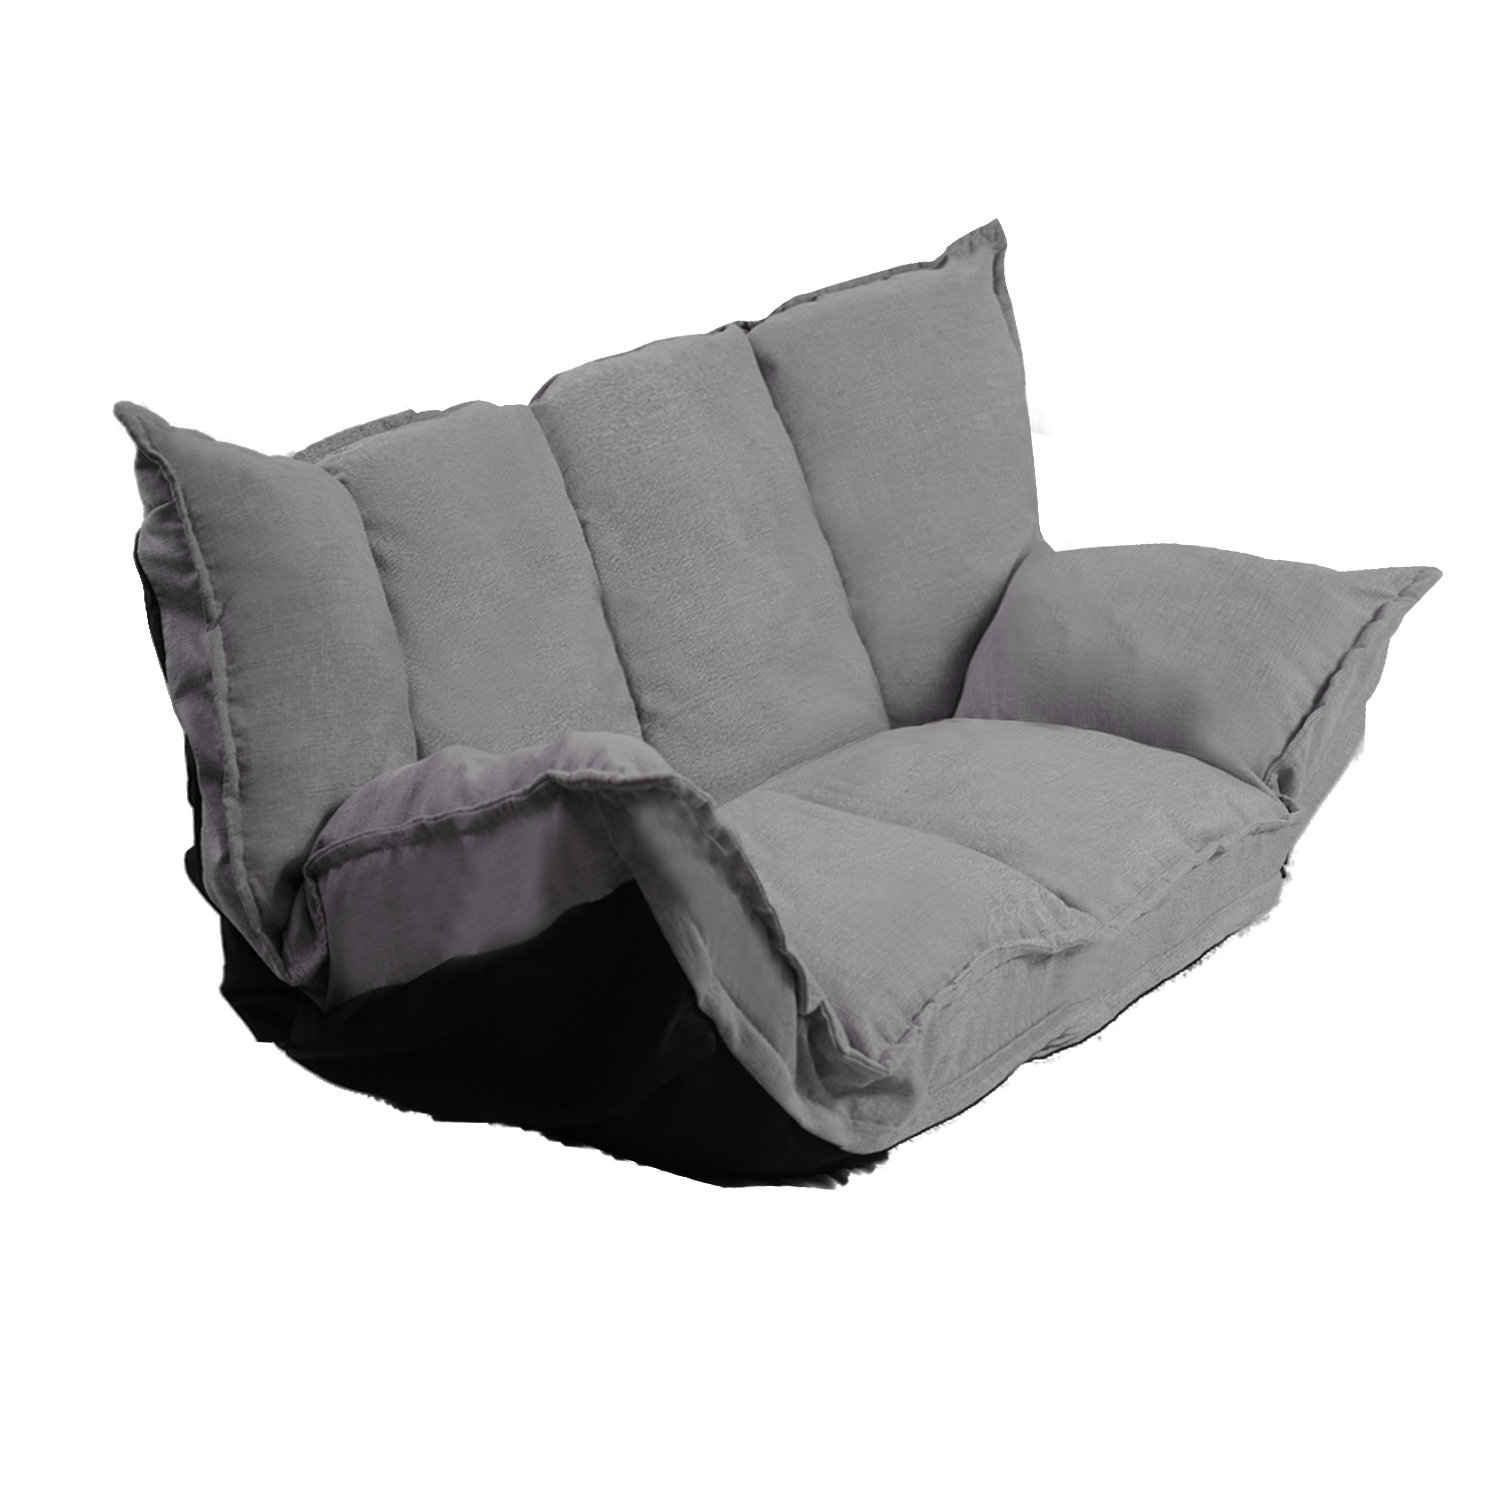 Modern Floor Gaming Cushion Chair Adjustable 14-Position Couch